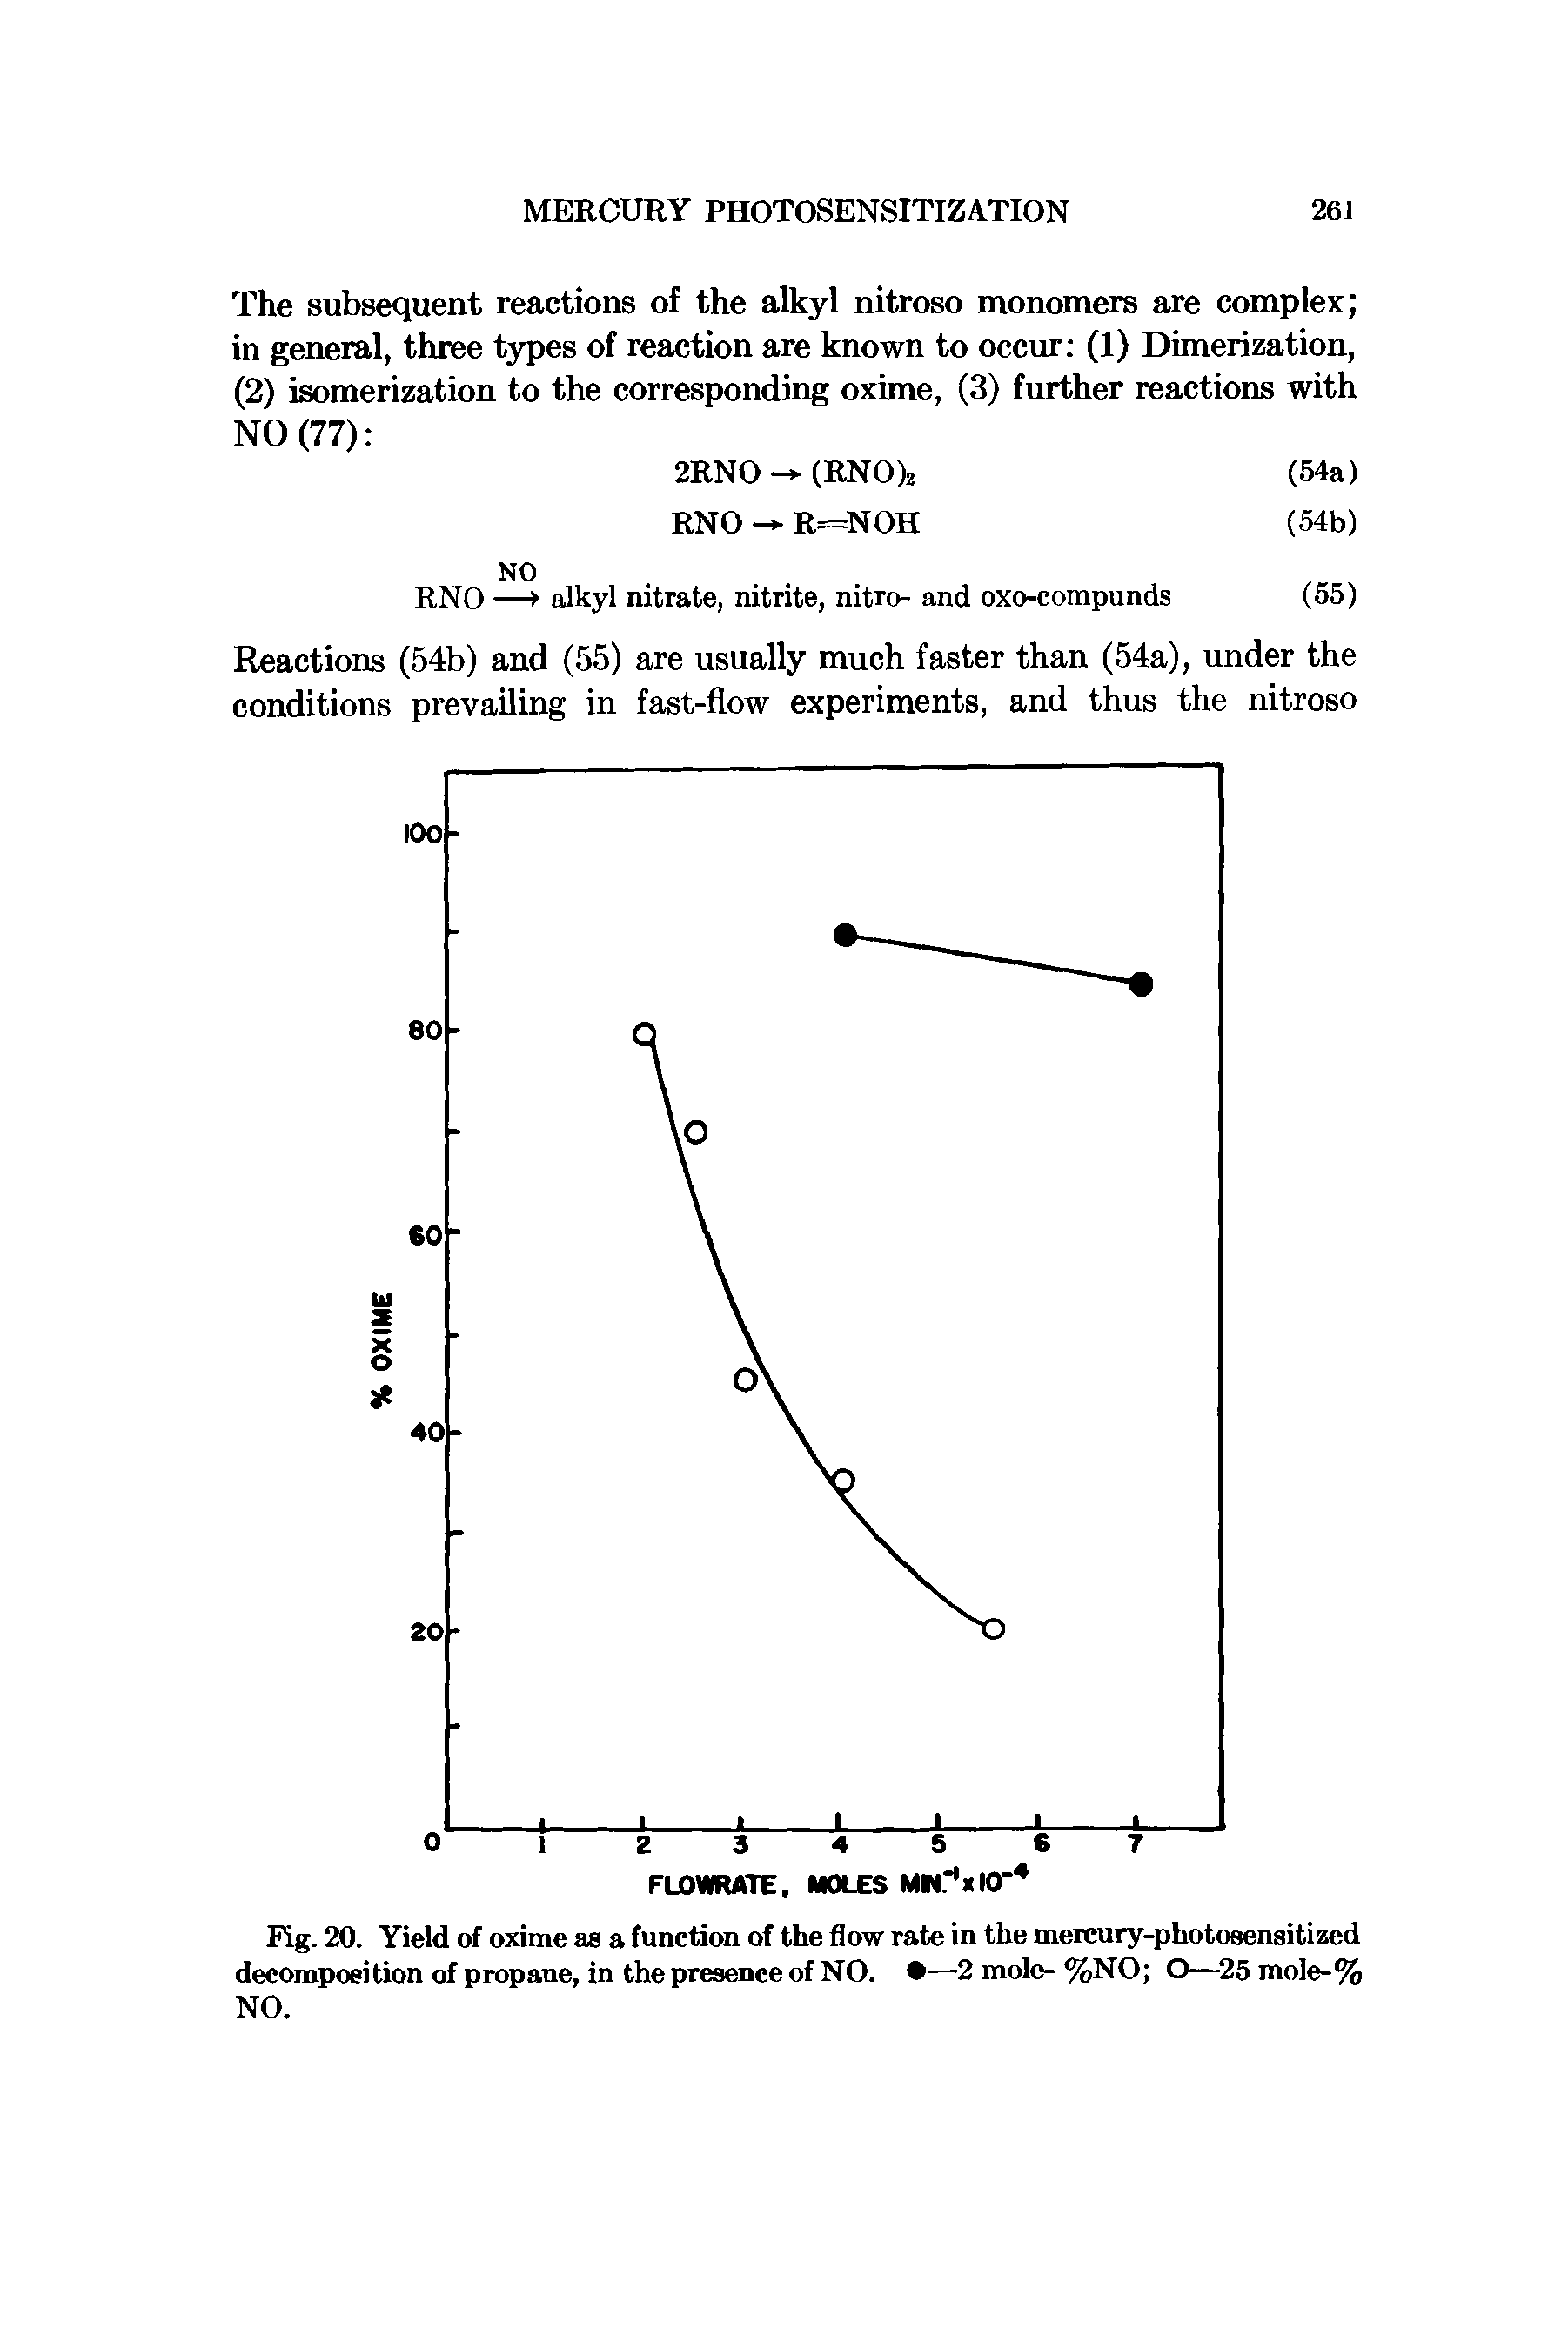 Fig. 20. Yield of oxime aa a function of the flow rate in the mercury-photosensitized decomposition of propane, in the presence of NO. —2 mole- %NO O—25 mole-% NO.